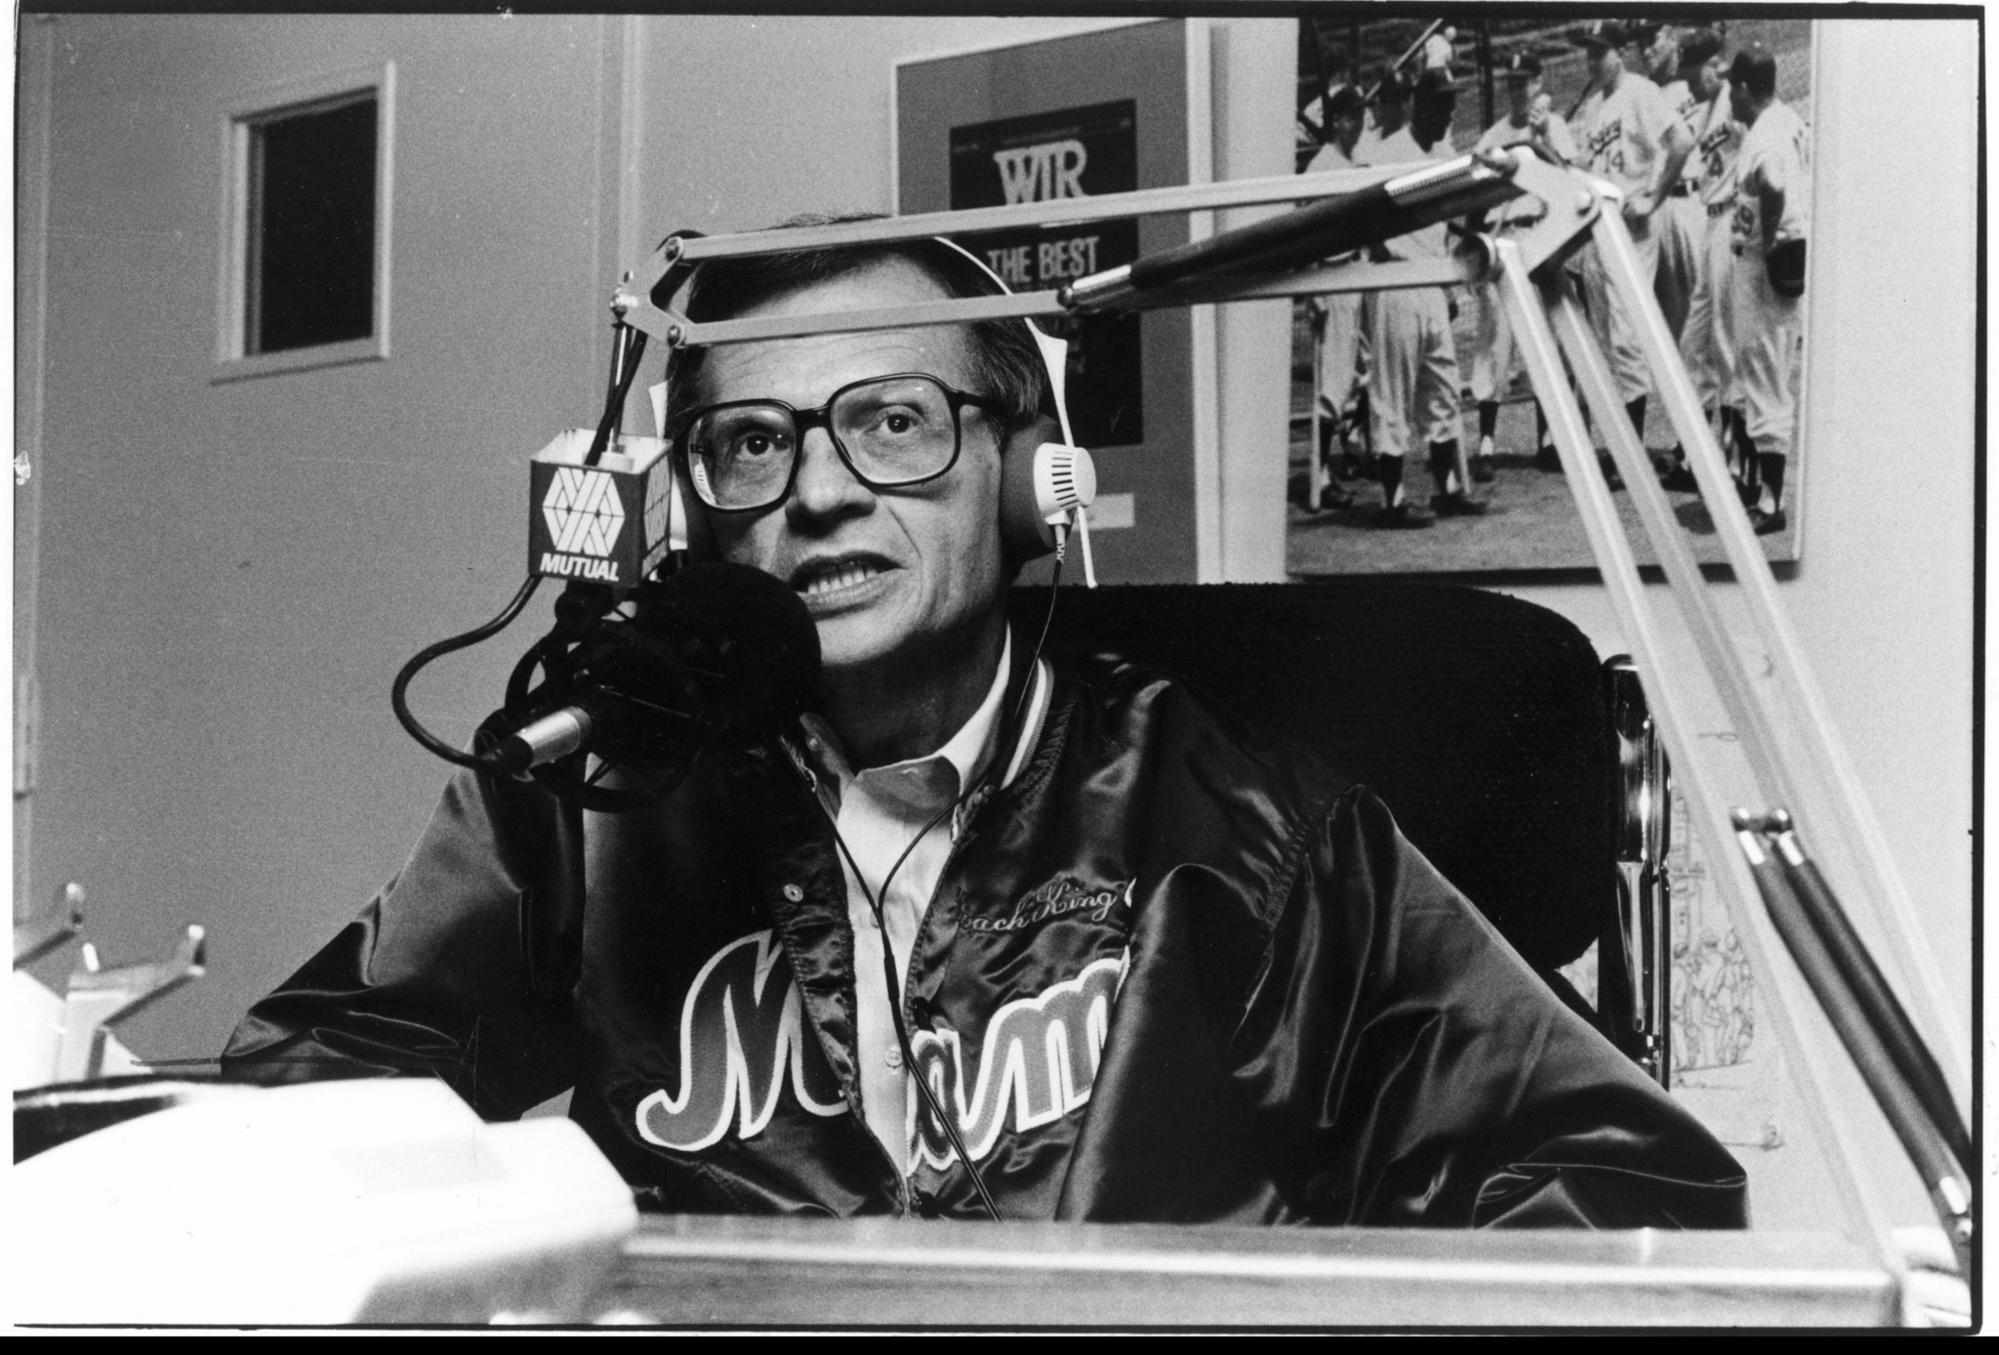 Larry King on the radio at Westwood One in Virginia in 1988.